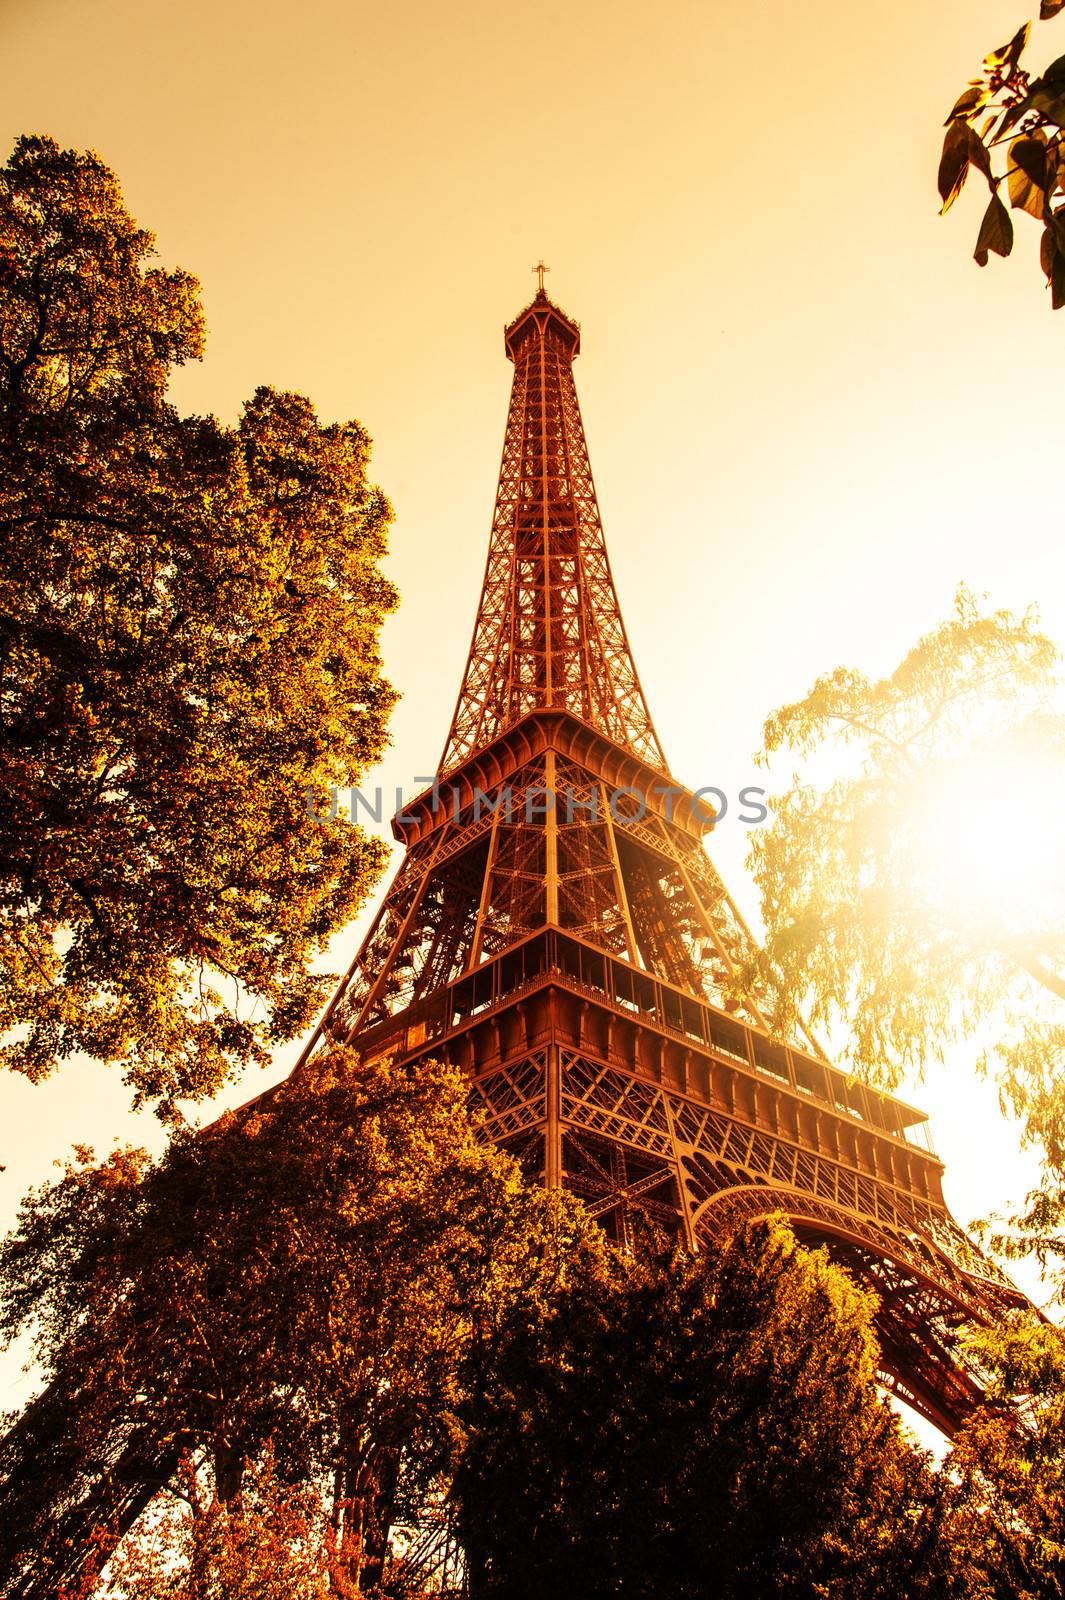 Image of Tour Eiffel and a nice sunset